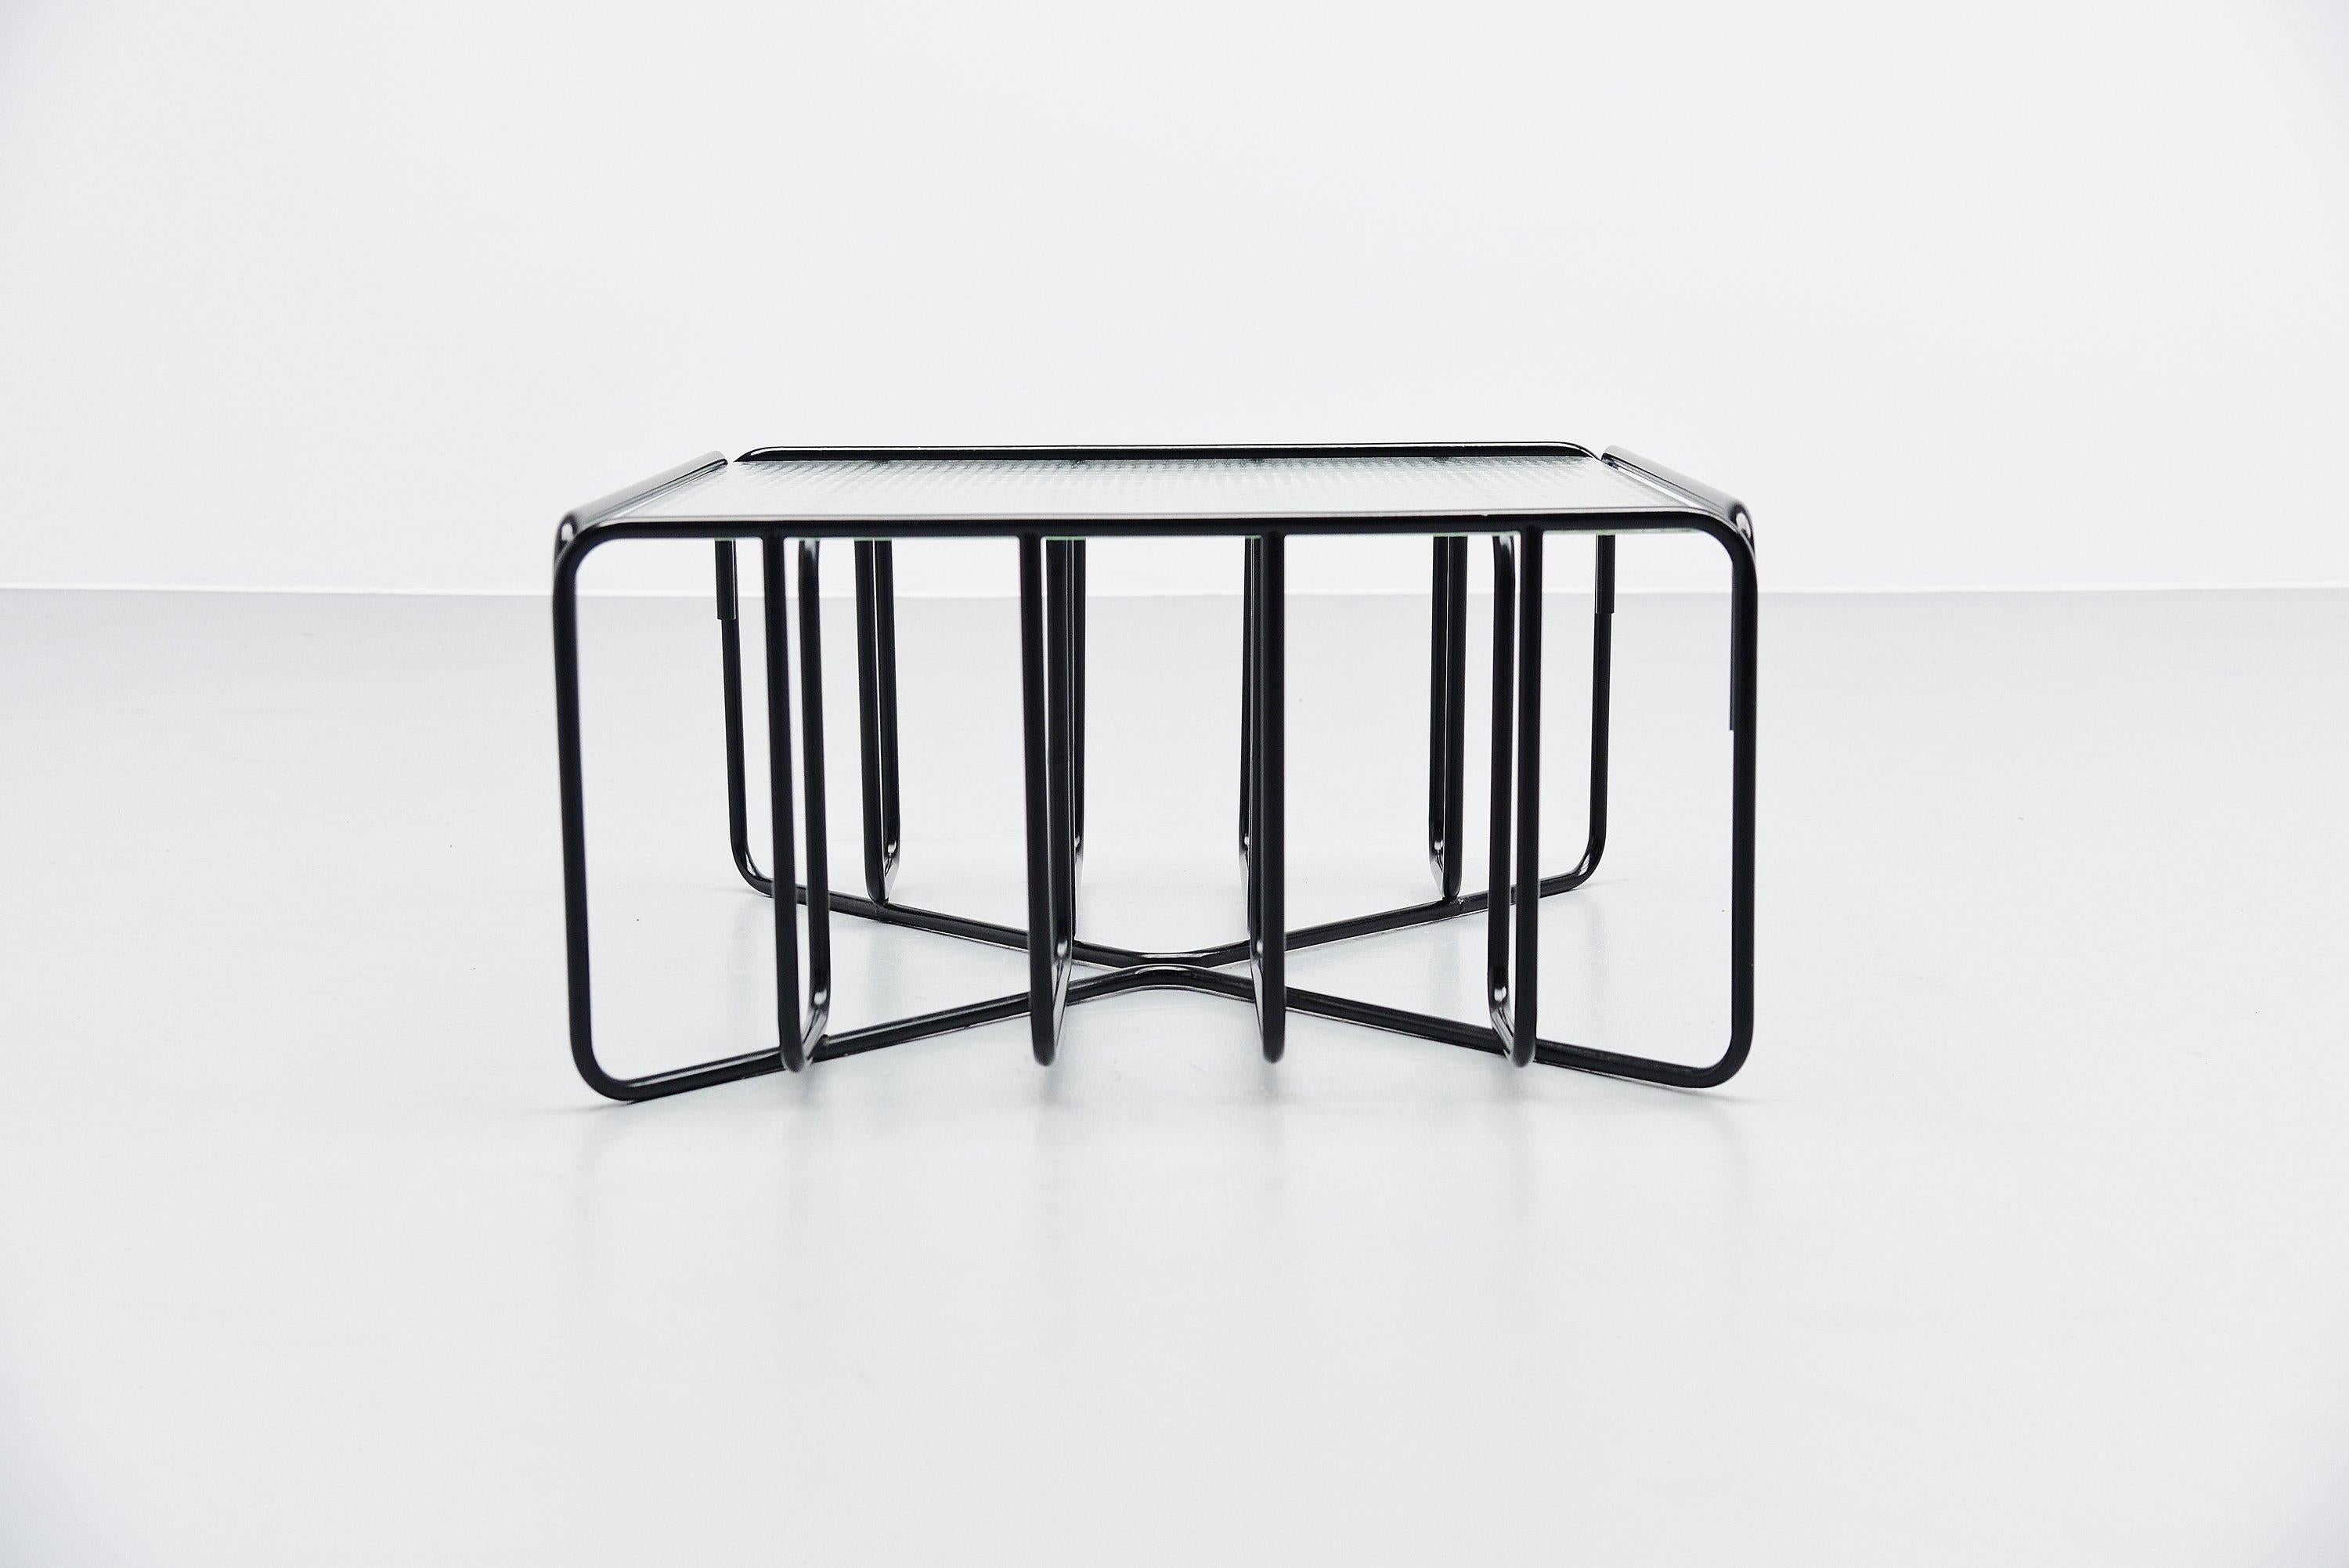 Fantastic modernist coffee table with made by unknown manufacturer, Holland, 1950. This table has a black painted tubular metal frame and a reinforced glass top. Very nice sculptural coffee table, super made. I have seen and had this table before